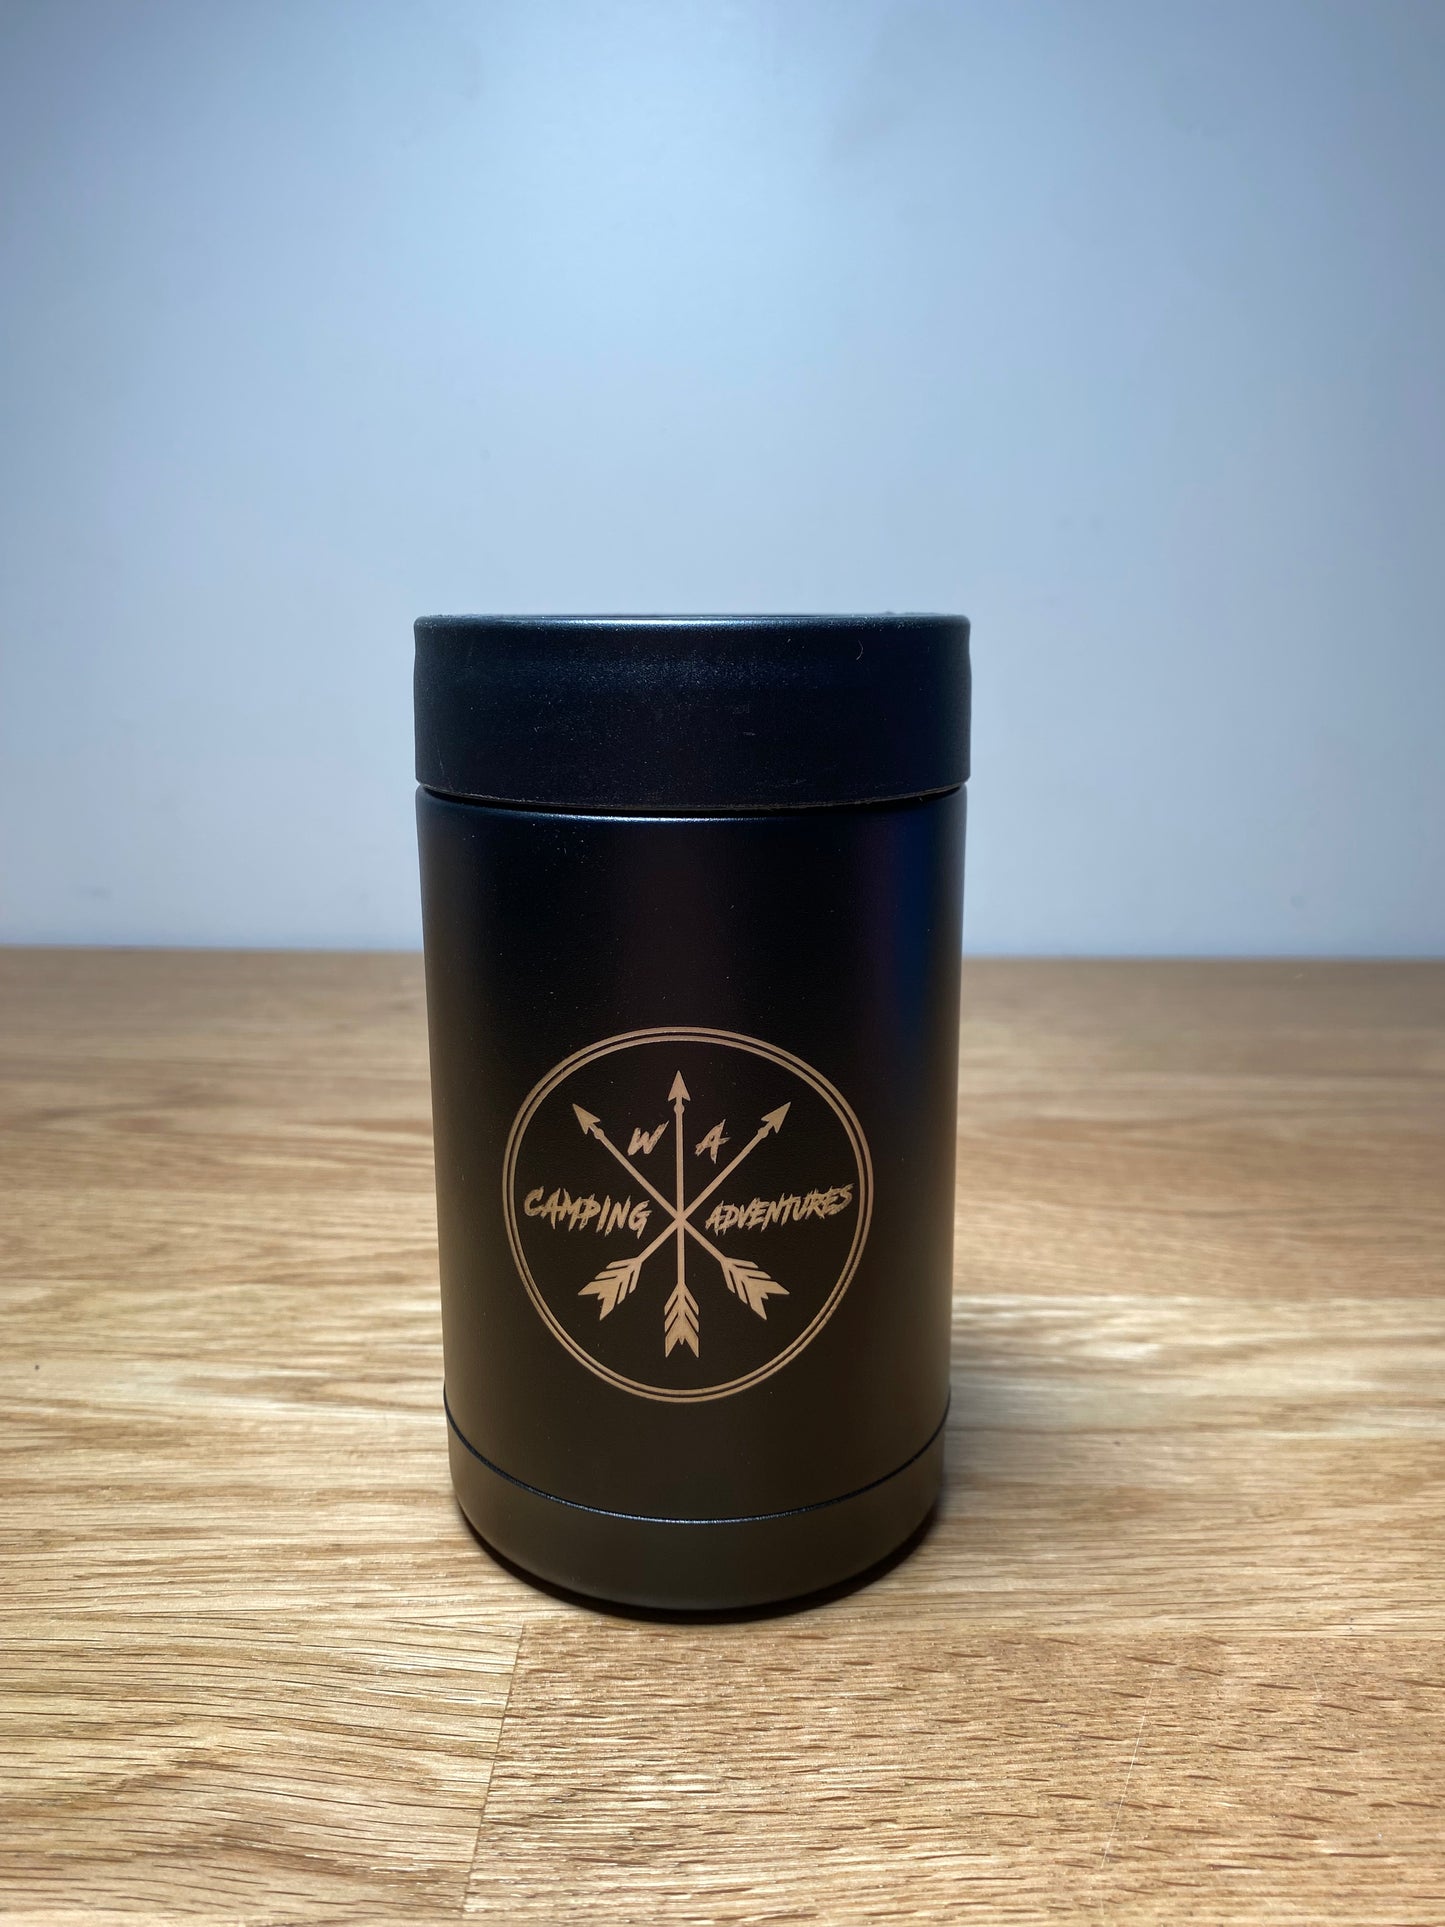 WACA 375ml stub-skey can cooler / whiskey cup